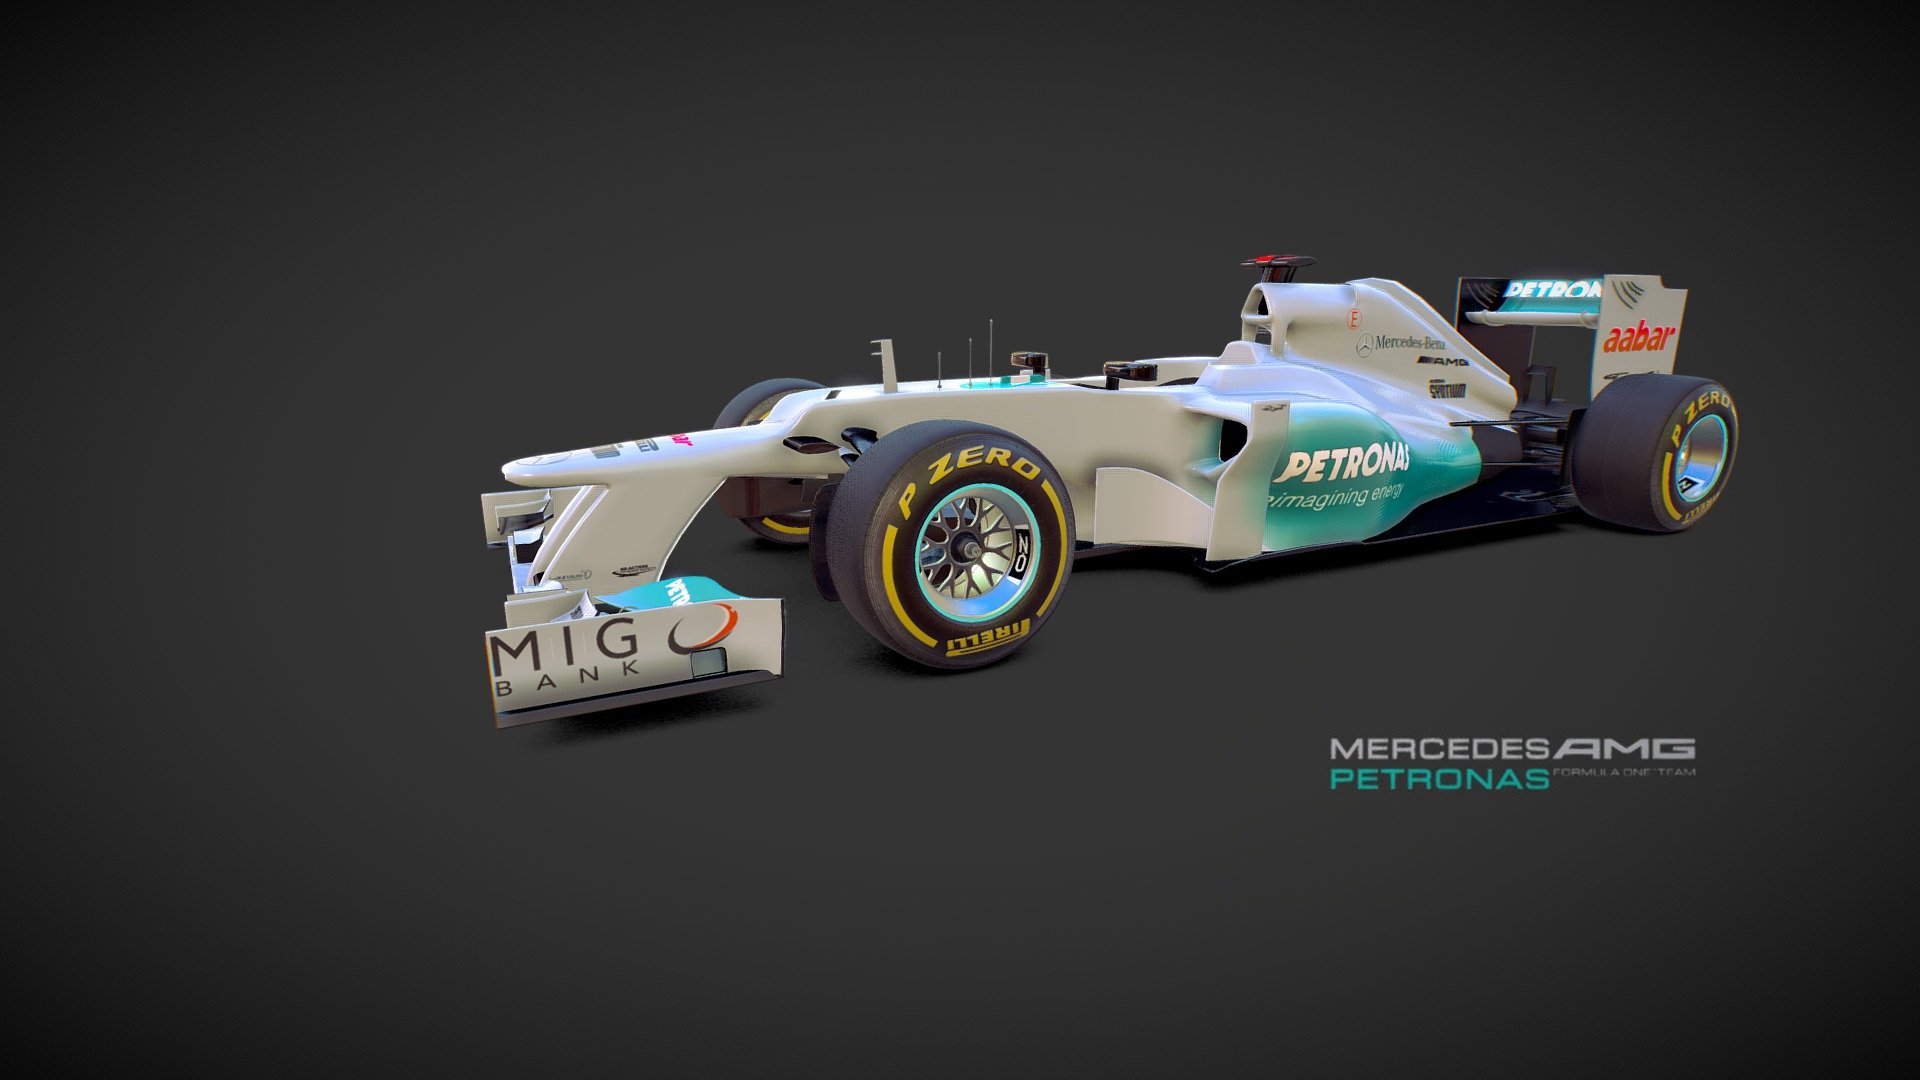 This is the 2012 Mercedes AMG F1. I made it for the upcomming F1 management game GPRM. https://www.facebook.com/GPRMGame?fref=ts
I also made all the other teams for the game.
All done in blender 3d model